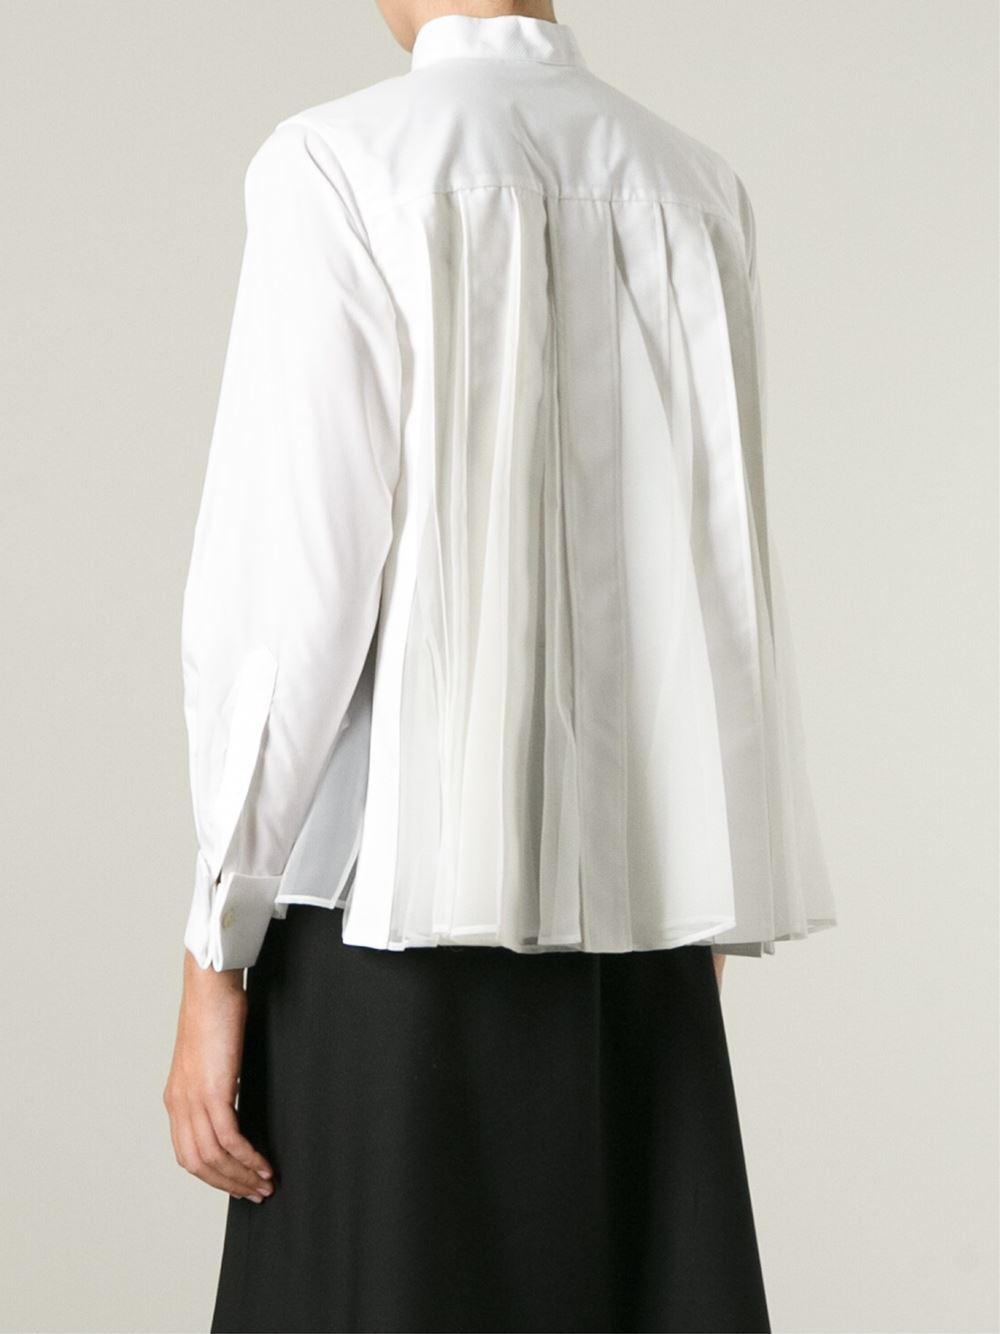 Sacai Pleated Back Shirt in White | Lyst